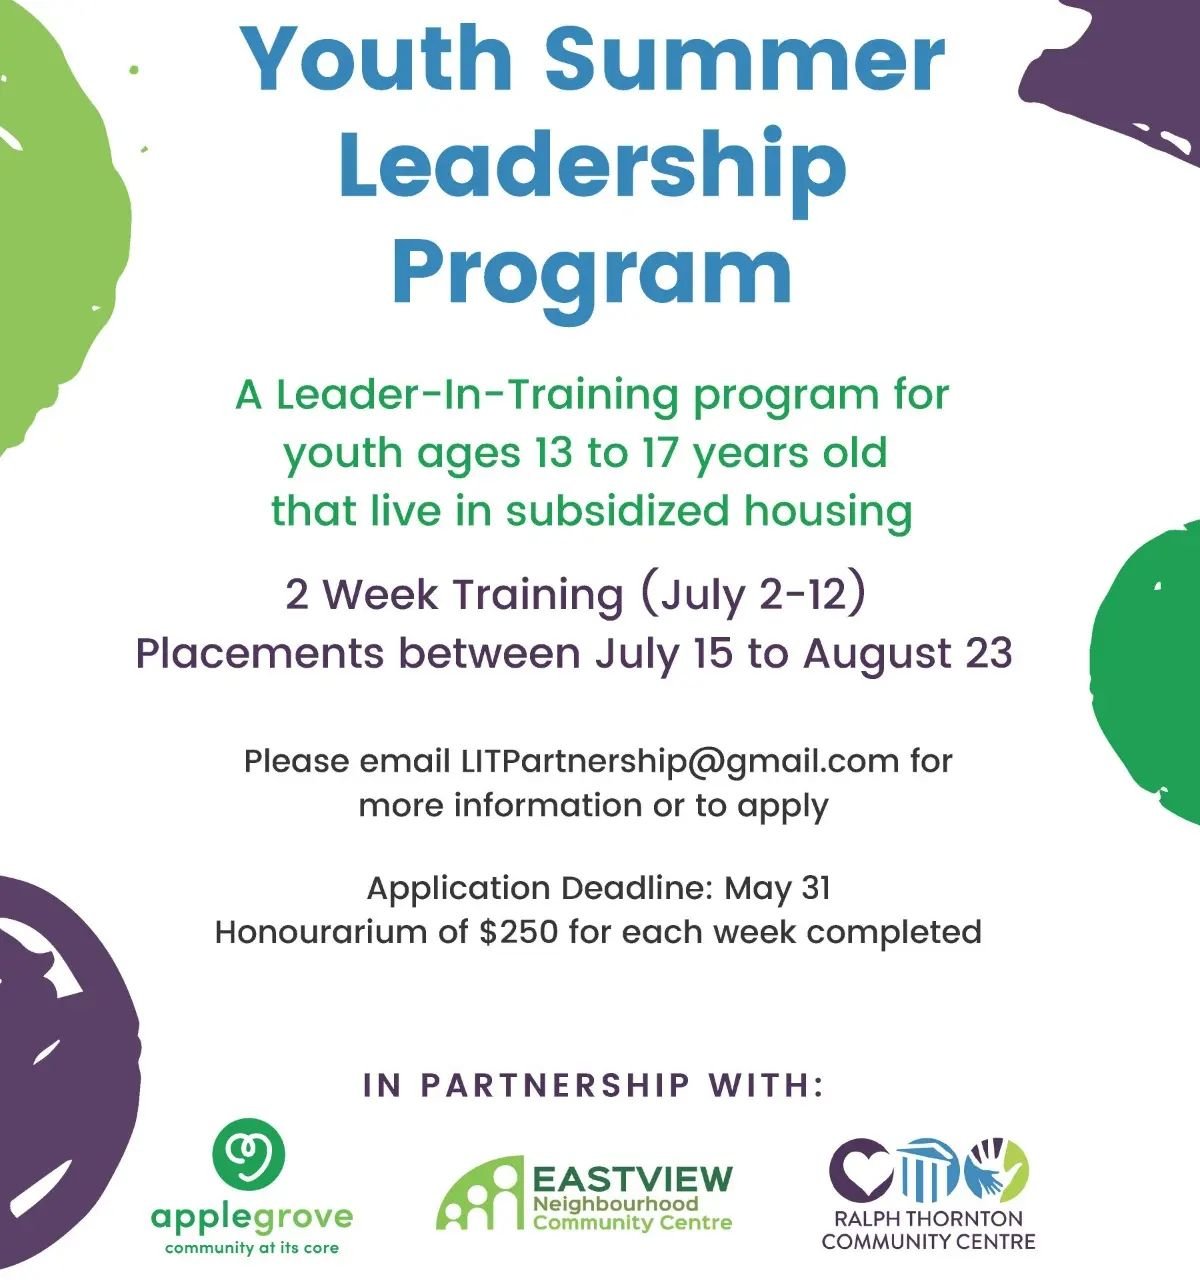 Spread the word to youth in your community about this exciting summer opportunity! 💚